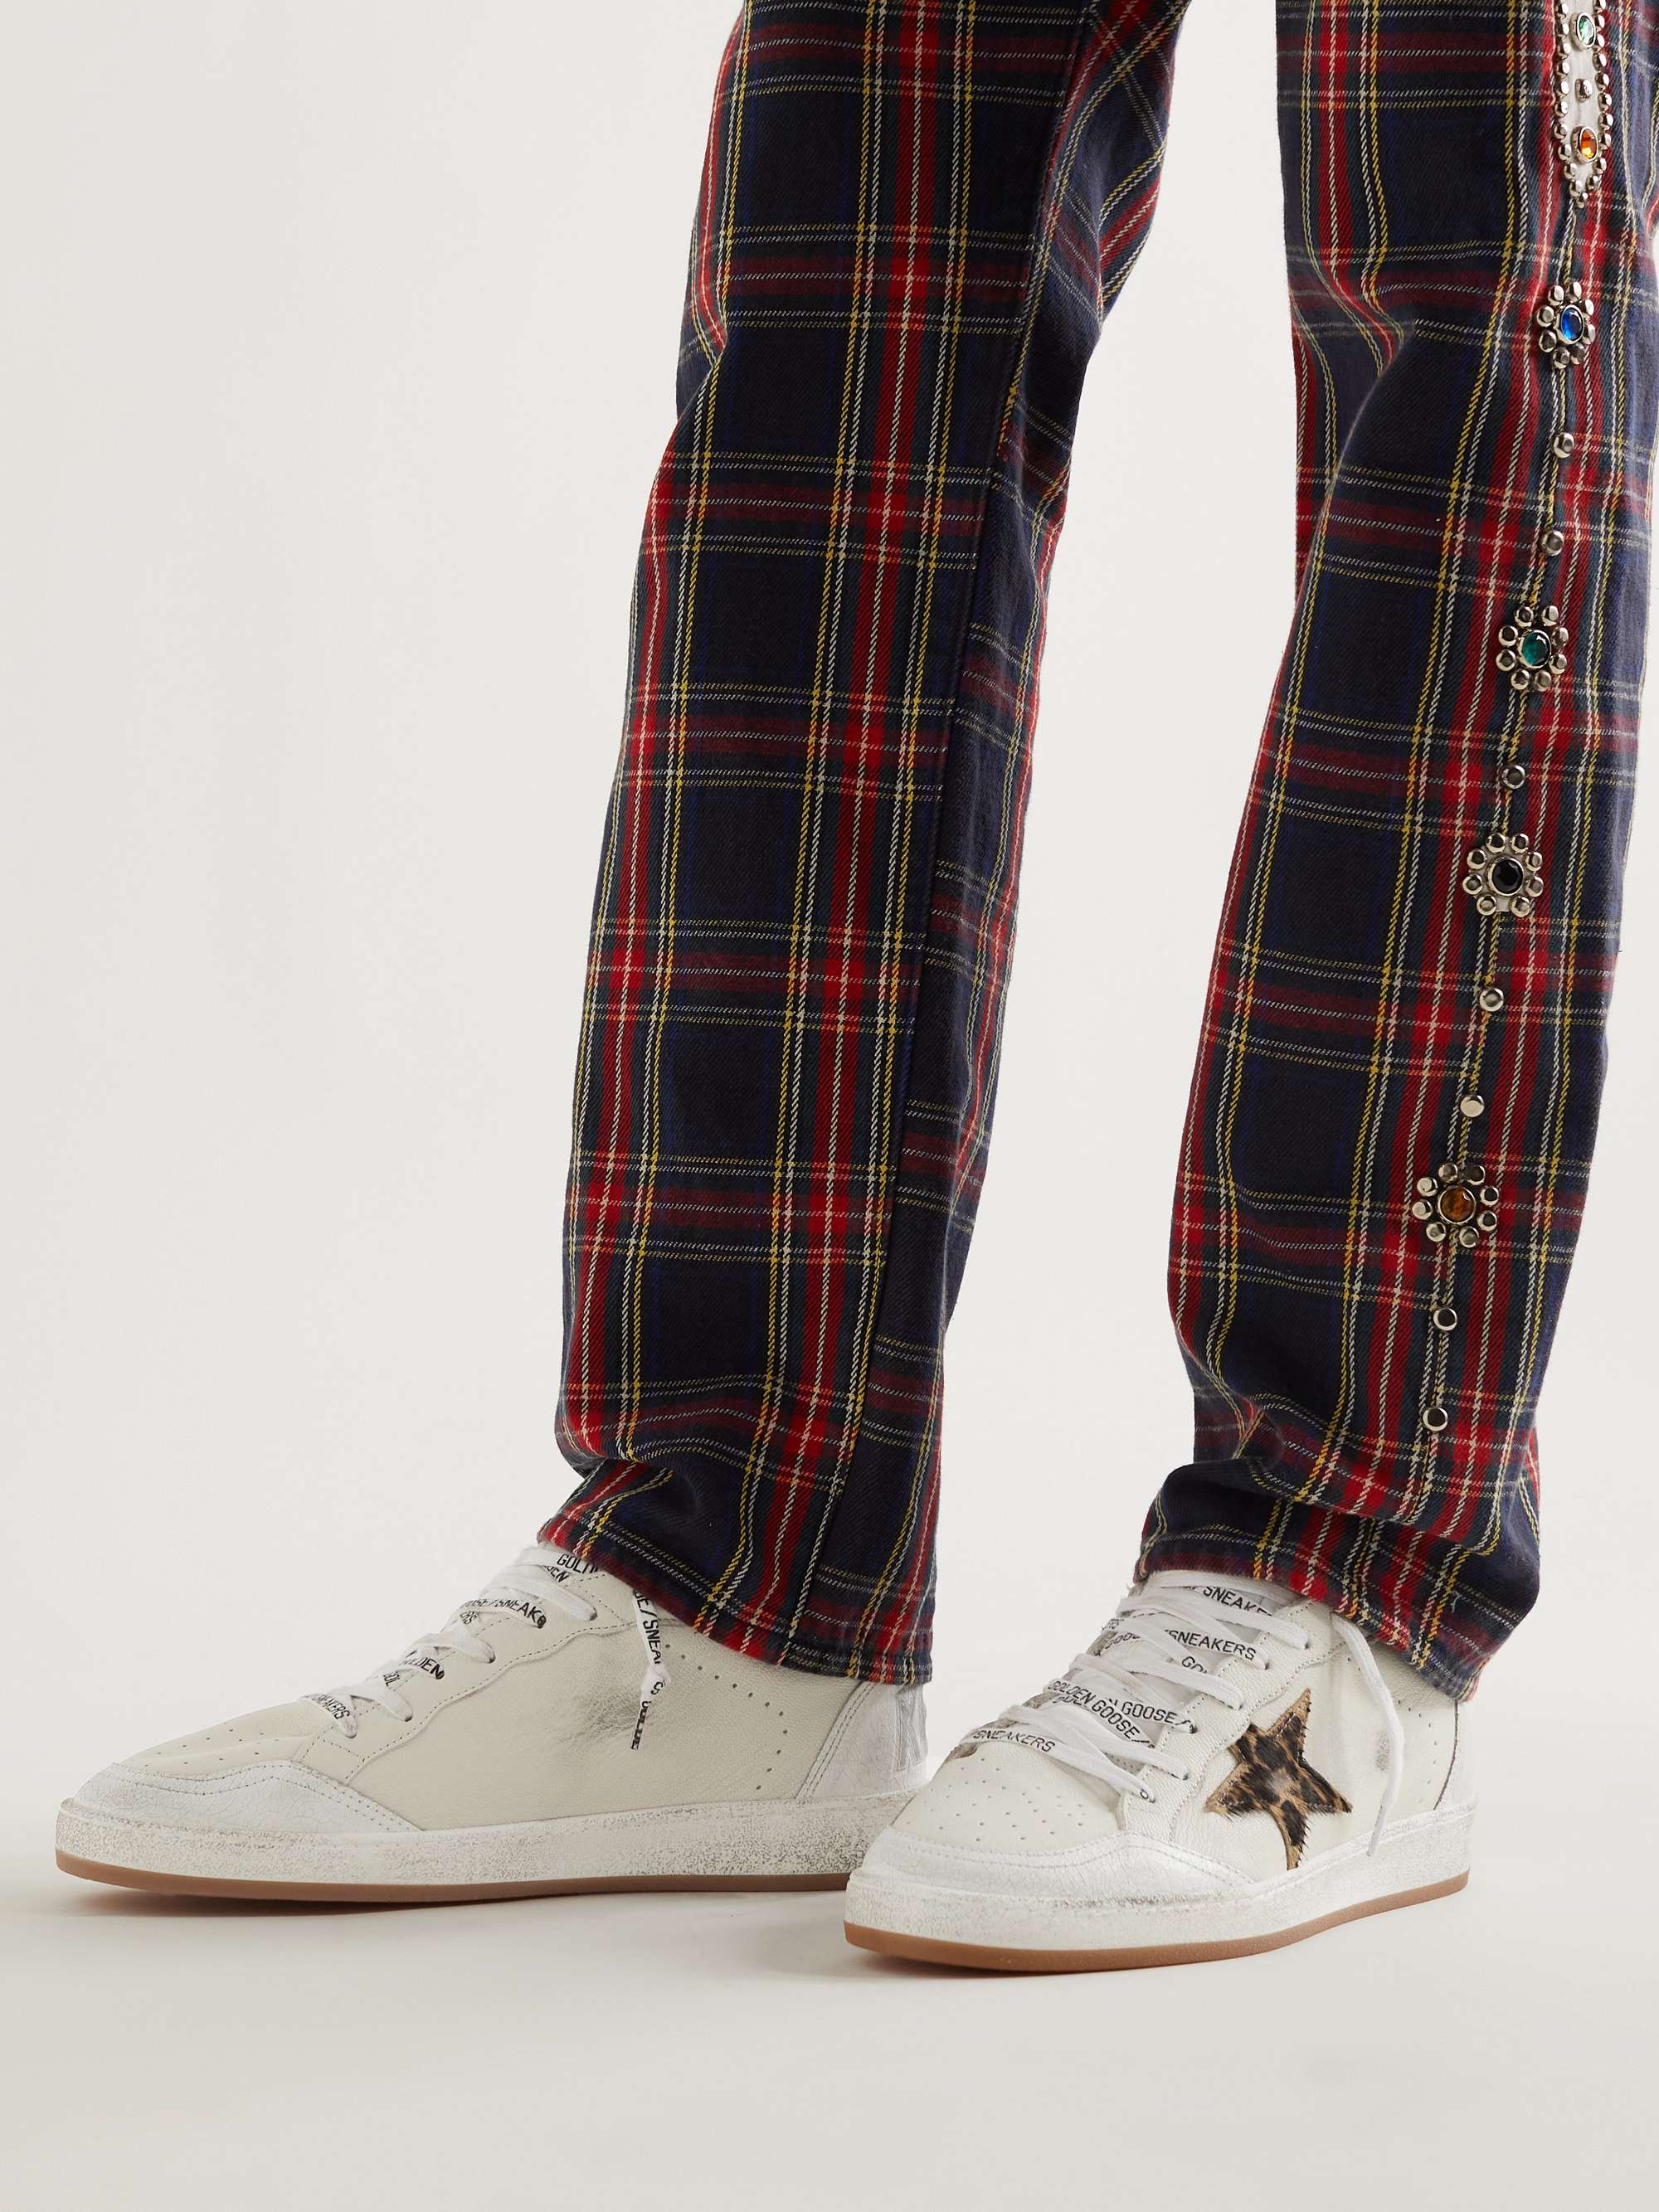 GOLDEN GOOSE Ballstar Distressed Calf Hair-Trimmed Leather Sneakers